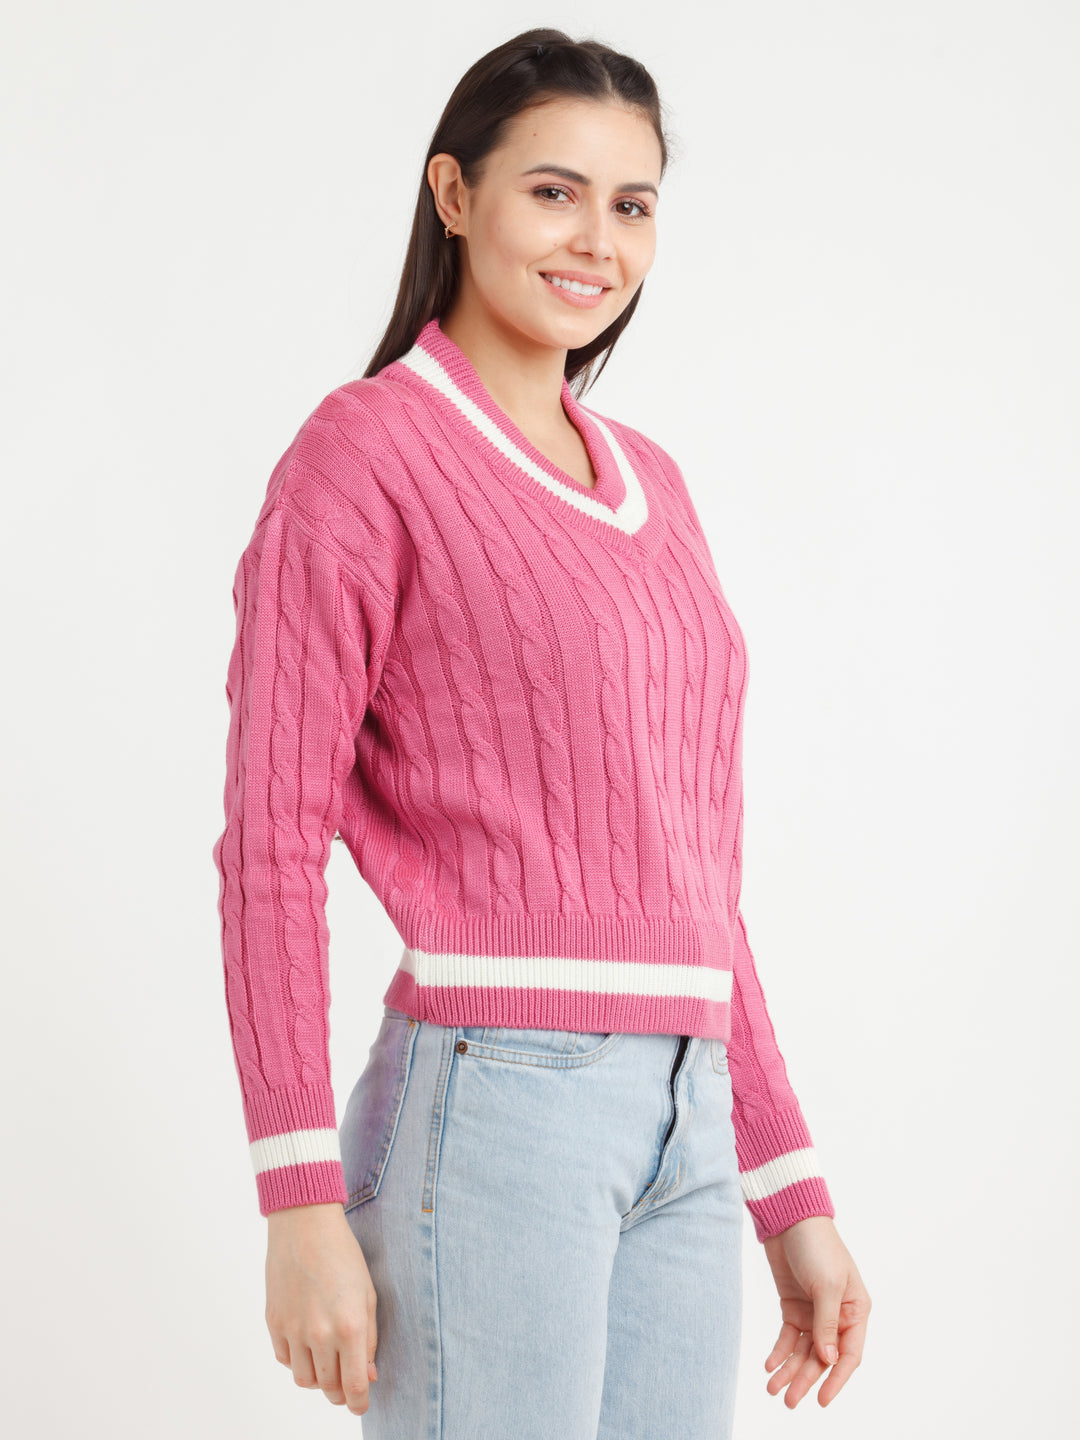 Pink Striped Sweater For Women